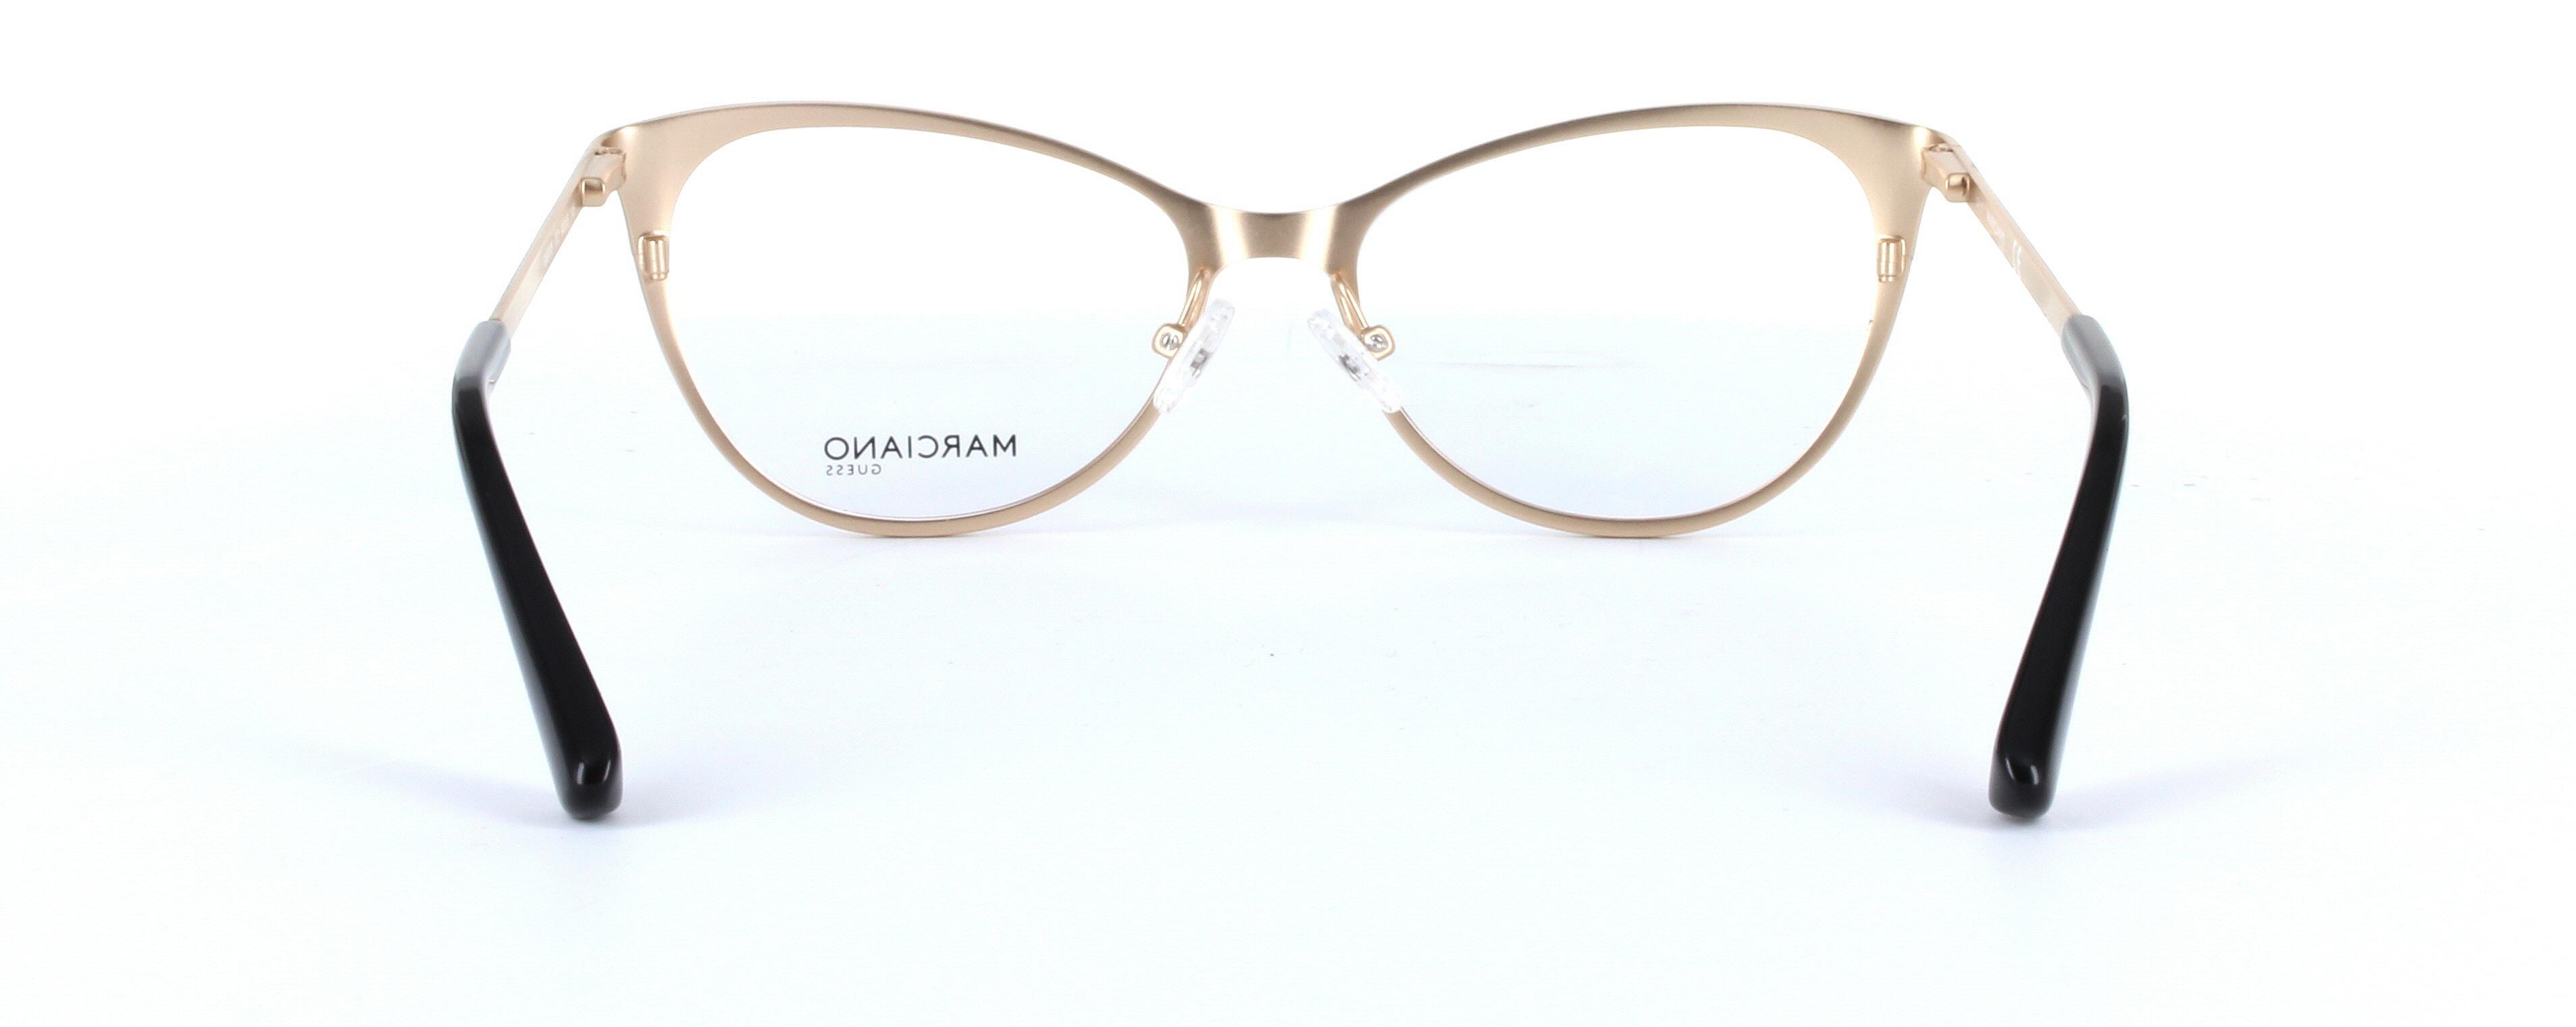 GUESS MARCIANO (GM0309-032) Gold Full Rim Oval Metal Glasses - Image View 3